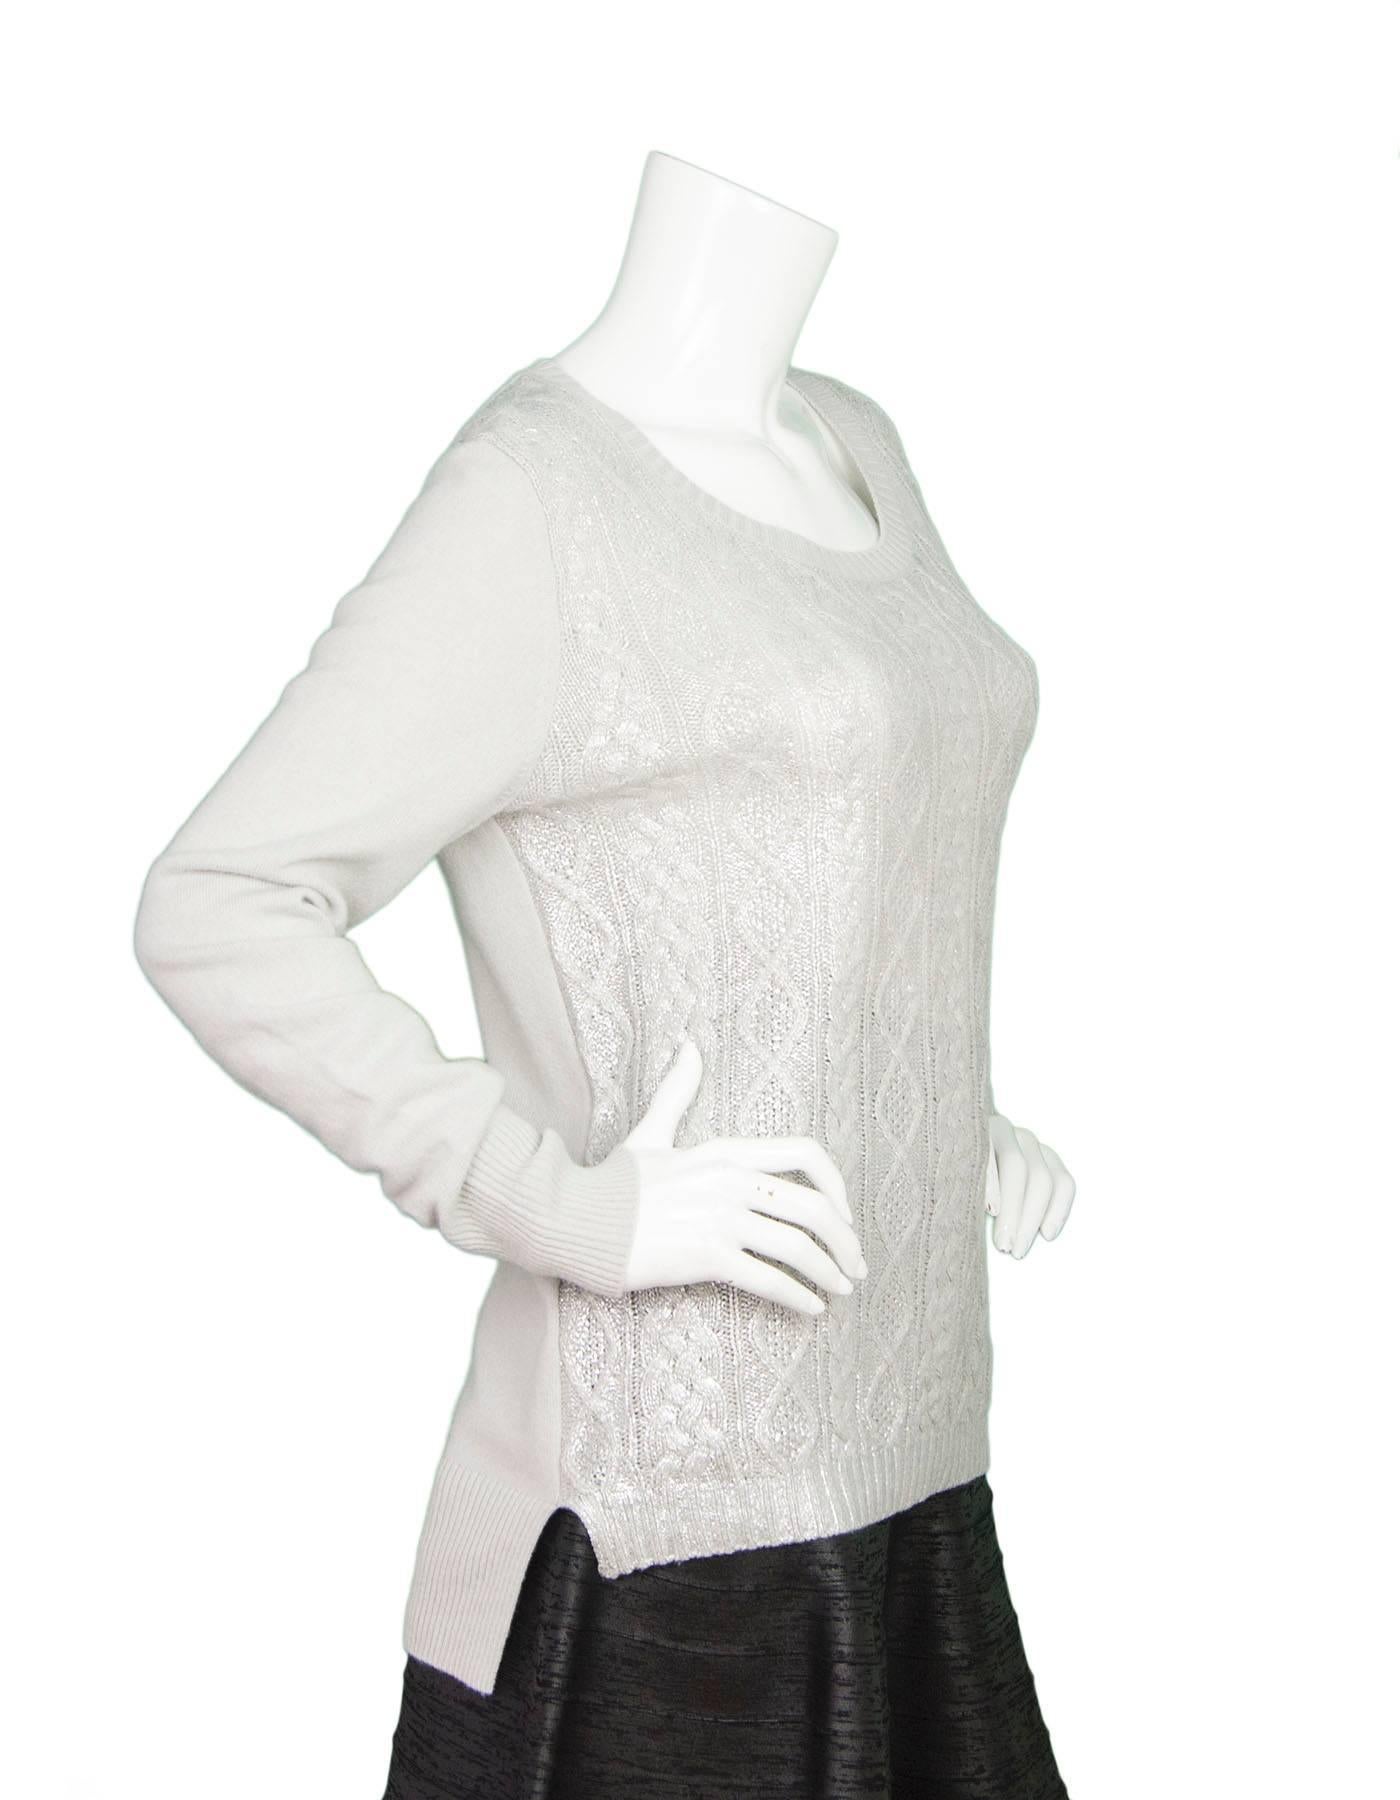 Christopher Fischer Grey & Silver Cashmere Sweater 
Features metallic silver painted over knit on front panel of sweater
Made In: China
Color: Grey and silver
Composition: 100% cashmere
Lining: None
Closure/Opening: Pull over
Exterior